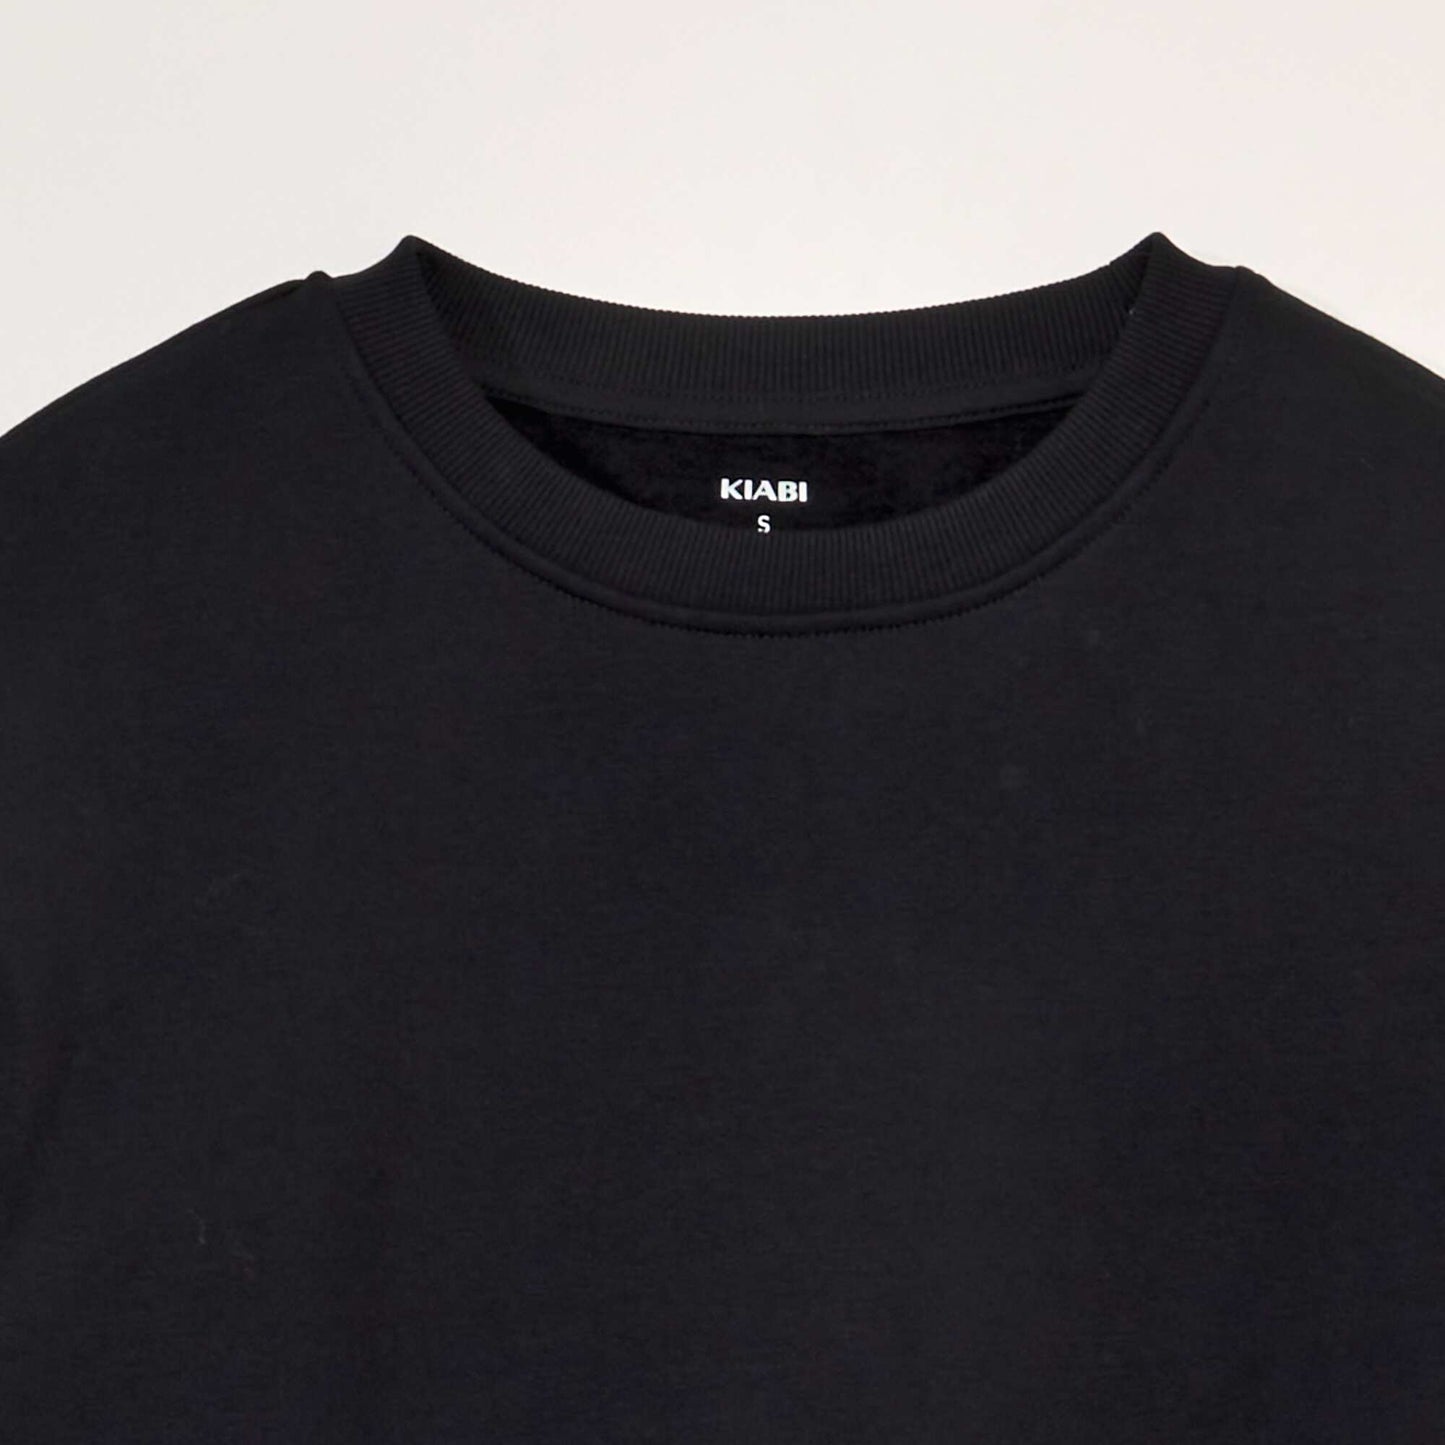 Round neck sweater with sweatshirt fabric lining REAL BLACK